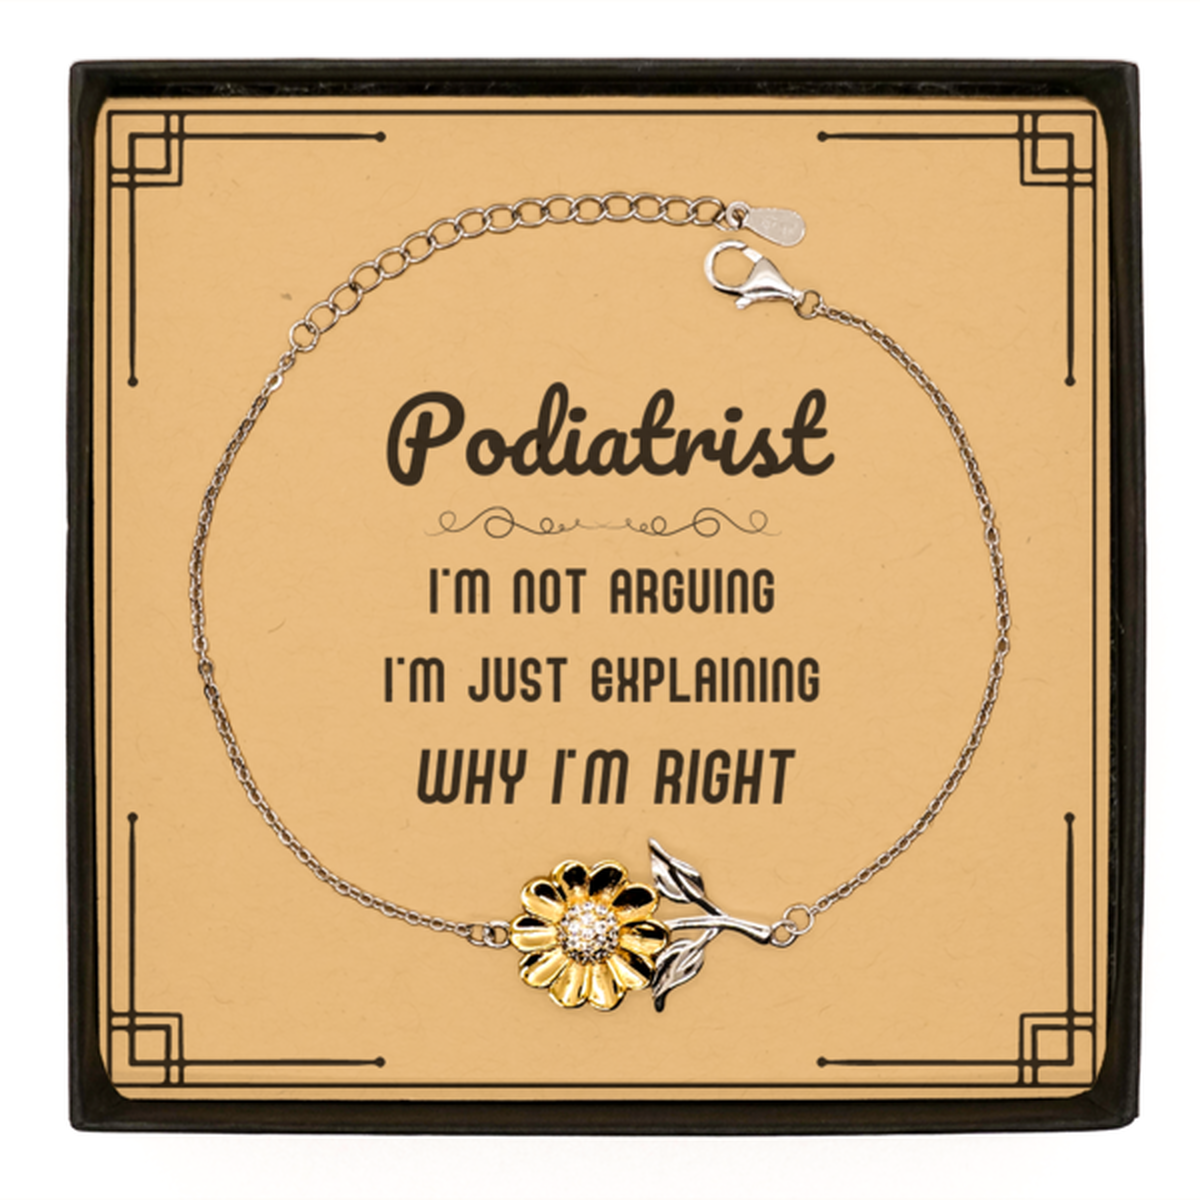 Podiatrist I'm not Arguing. I'm Just Explaining Why I'm RIGHT Sunflower Bracelet, Funny Saying Quote Podiatrist Gifts For Podiatrist Message Card Graduation Birthday Christmas Gifts for Men Women Coworker